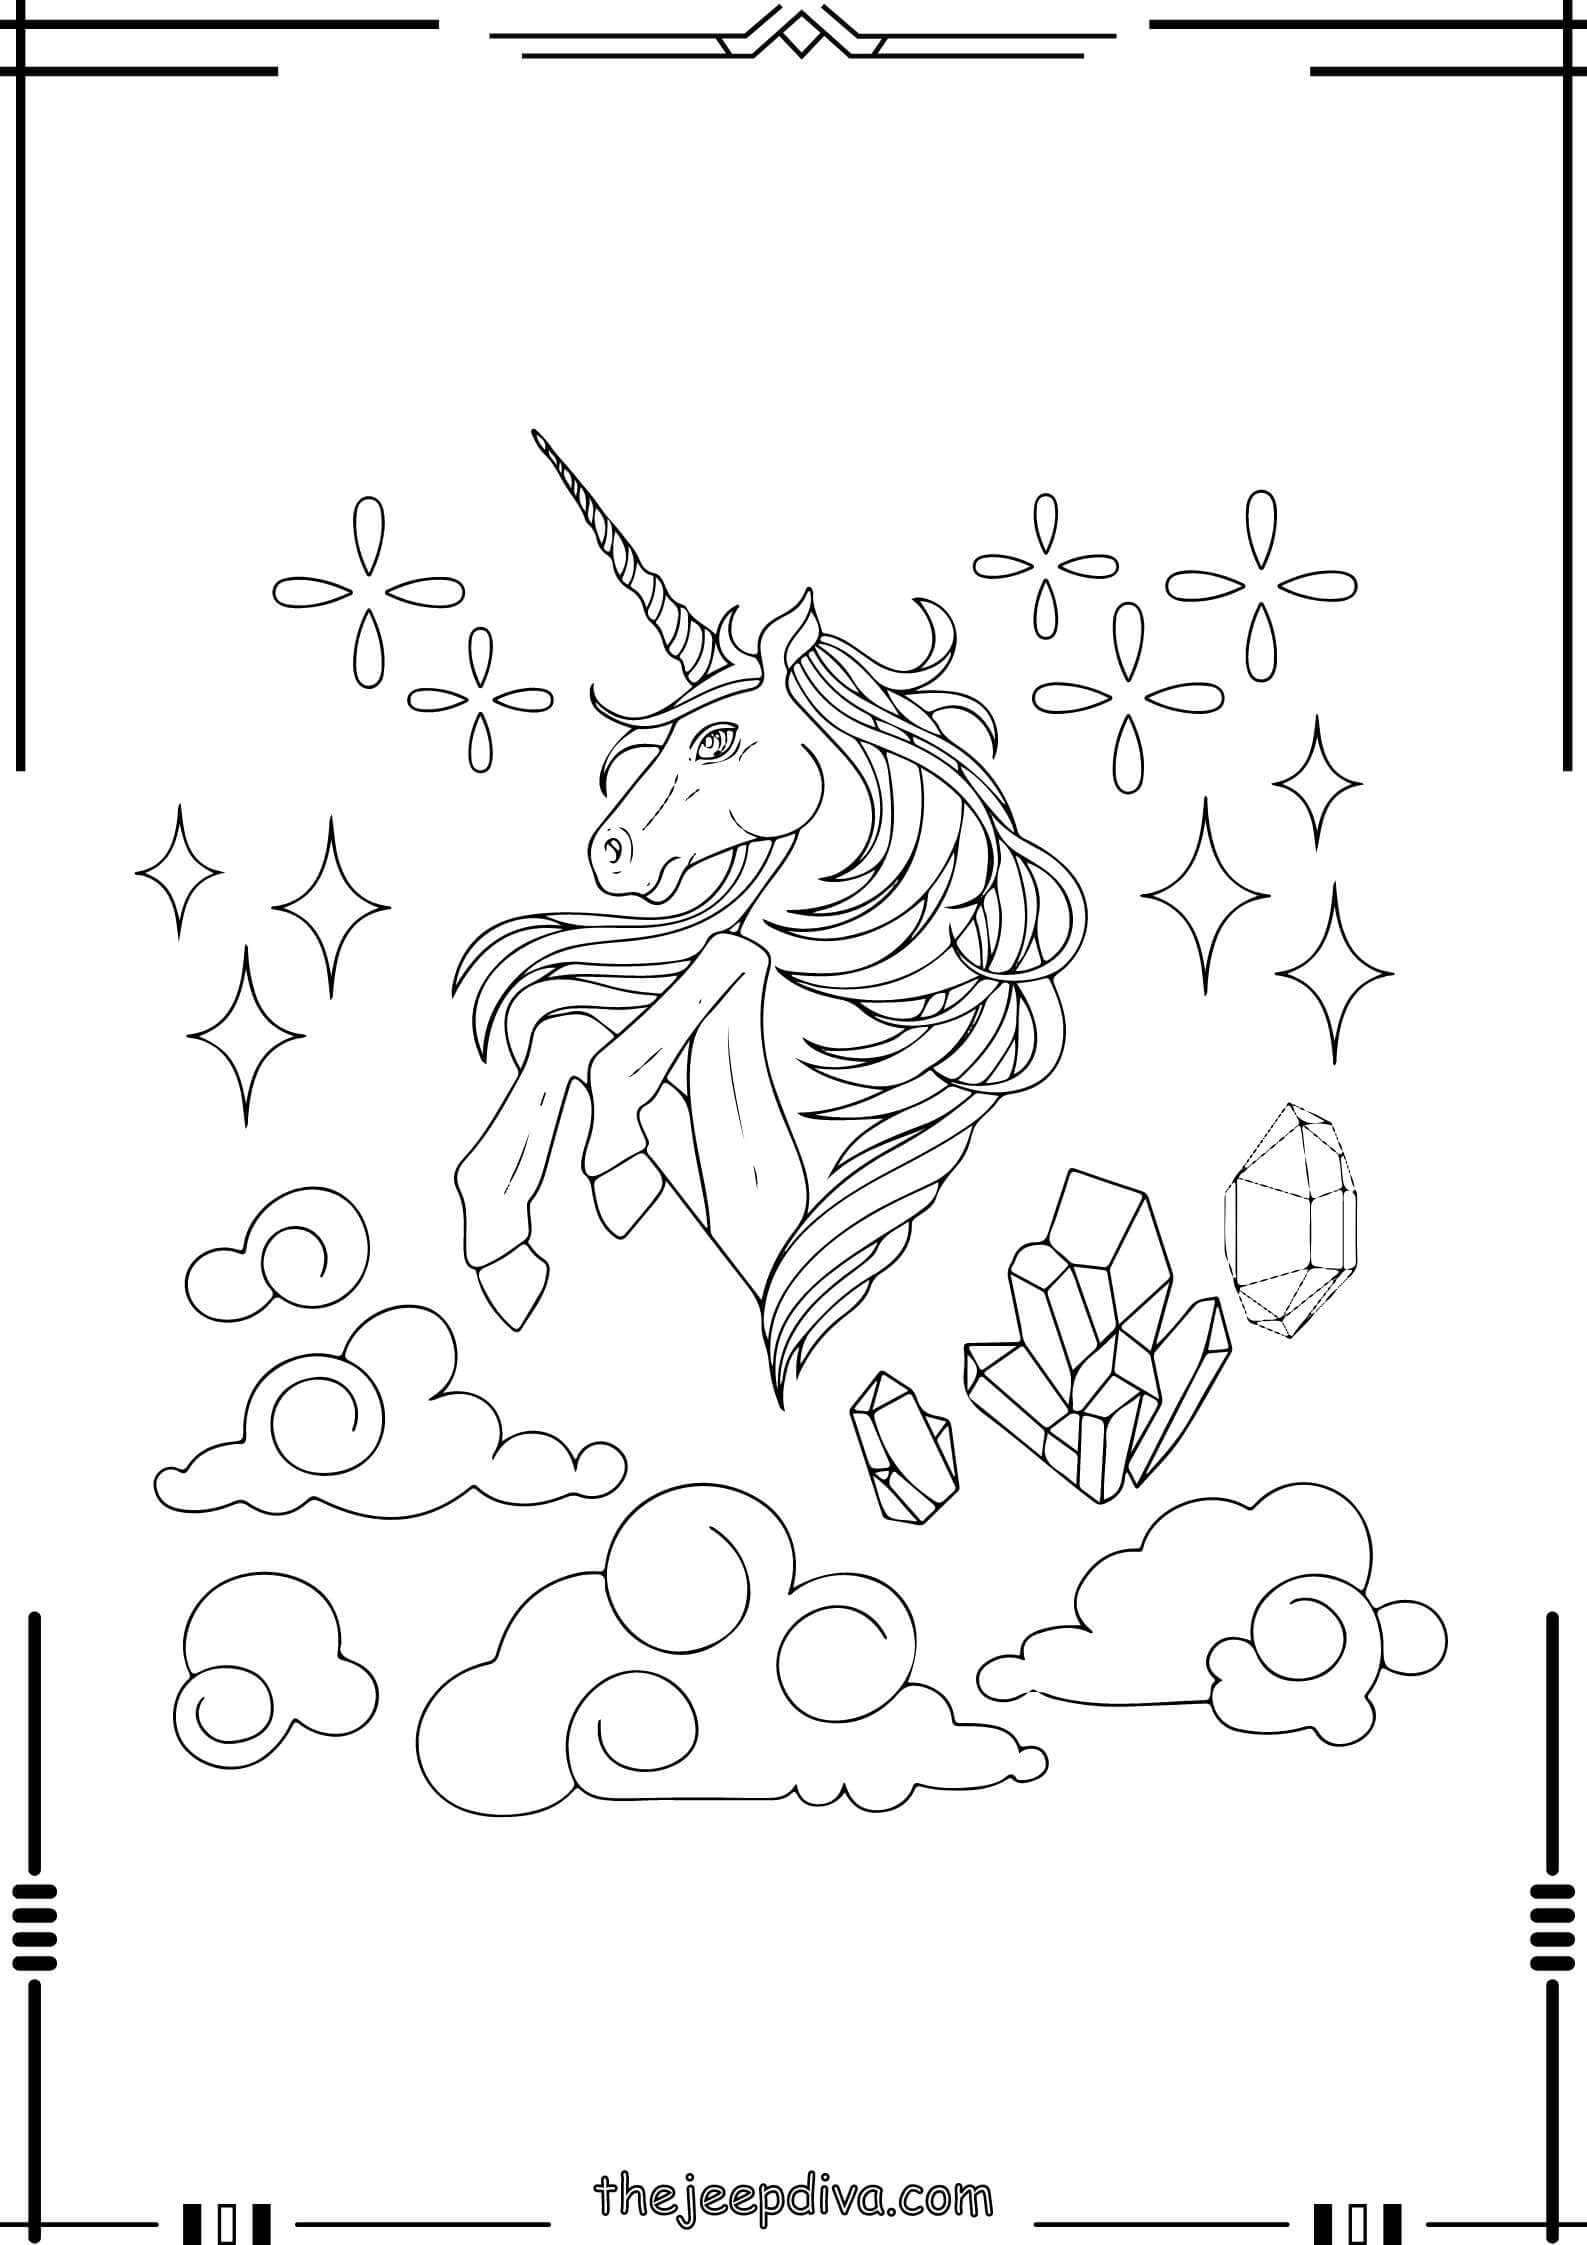 unicorn-coloring-page-easy-24